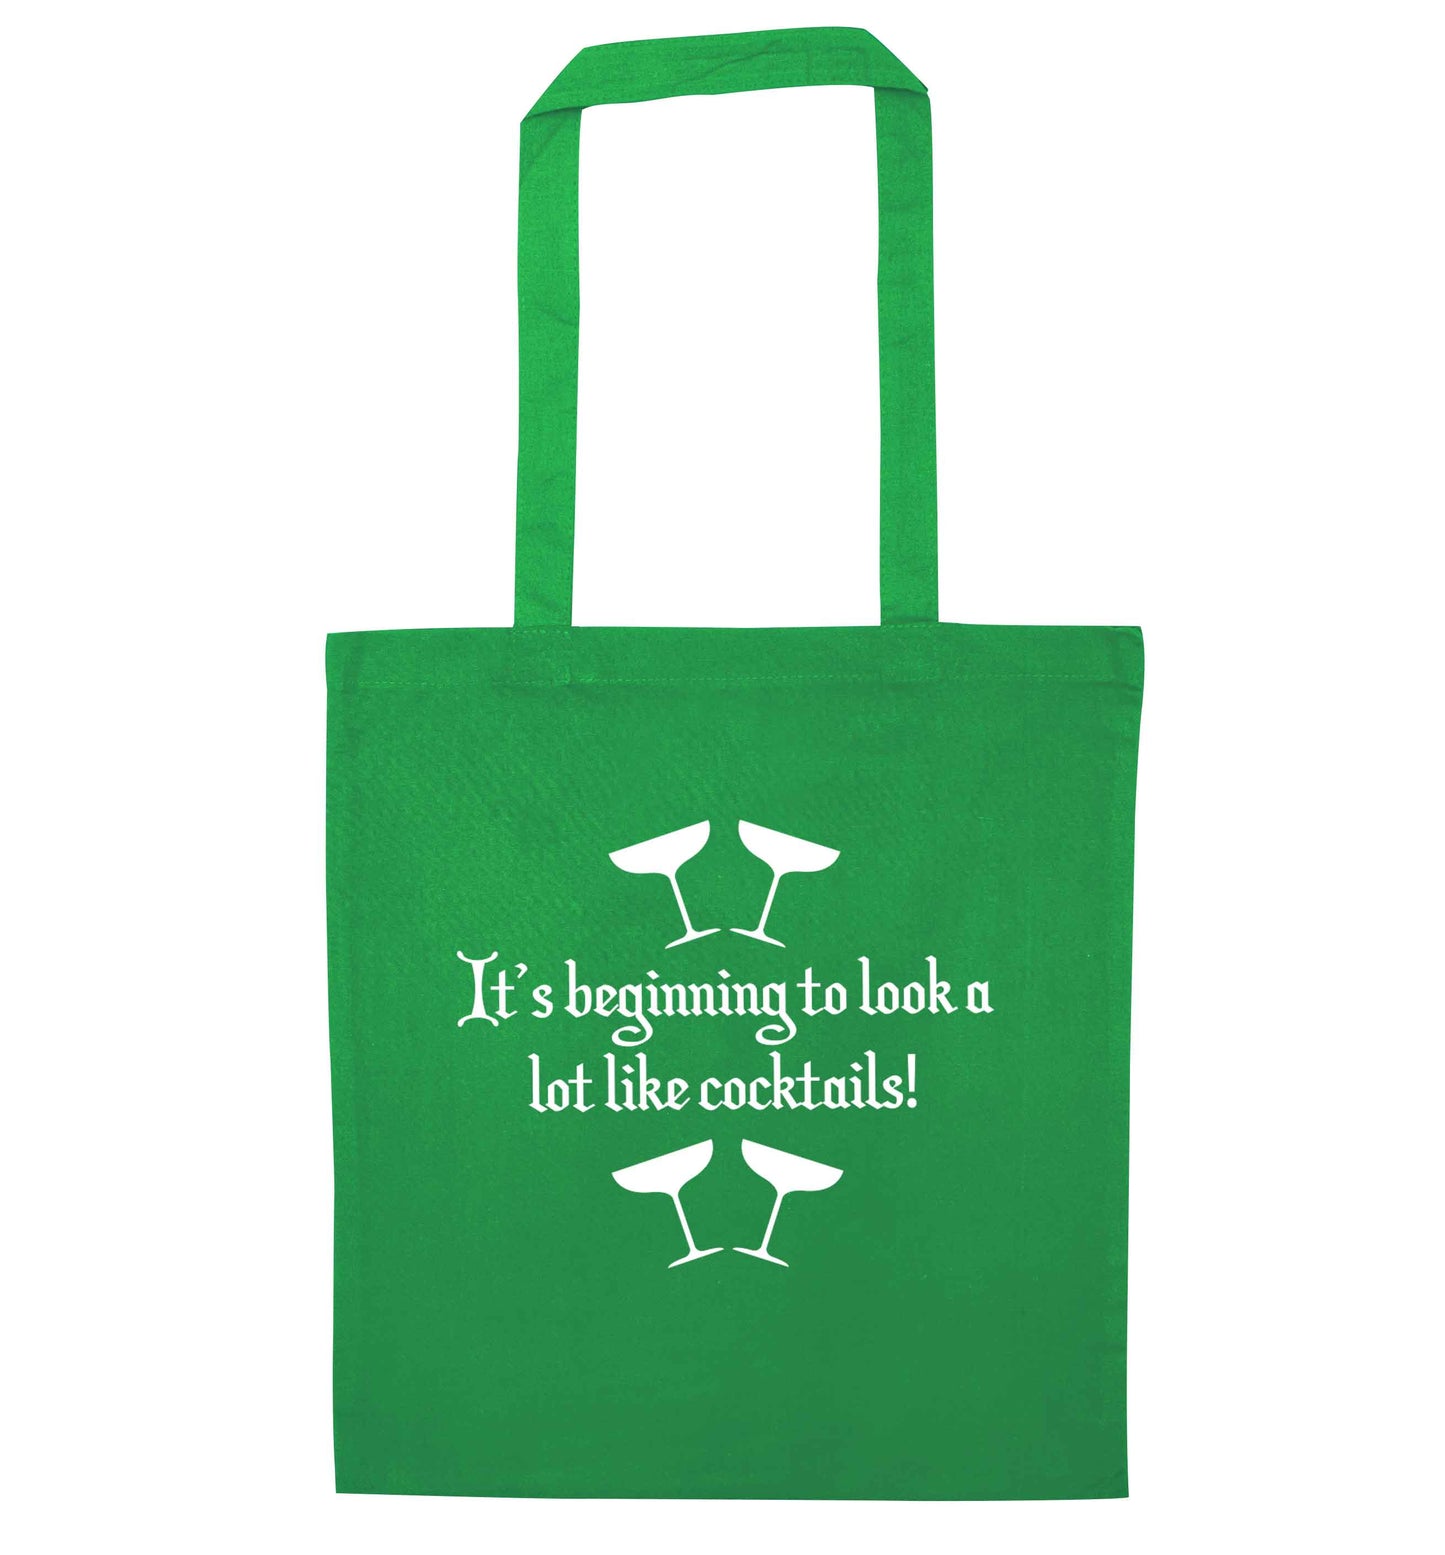 It's beginning to look a lot like cocktails green tote bag